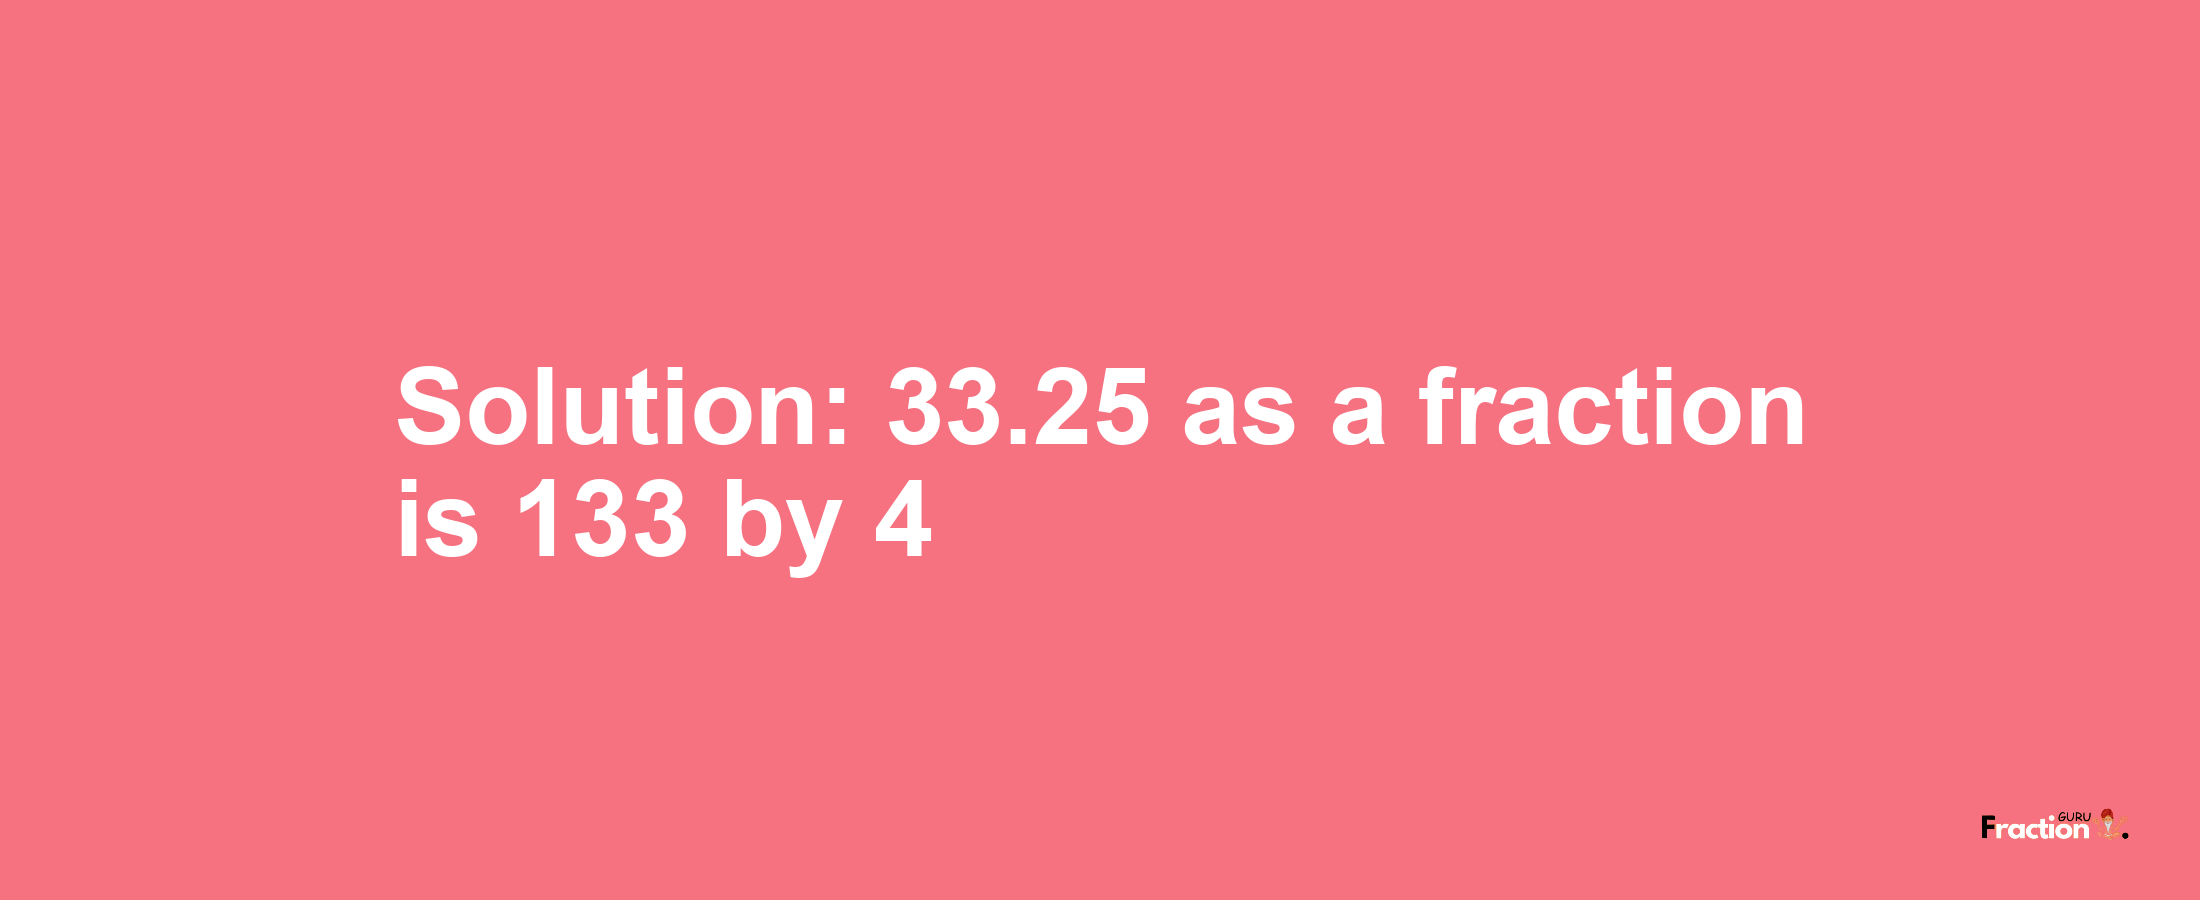 Solution:33.25 as a fraction is 133/4